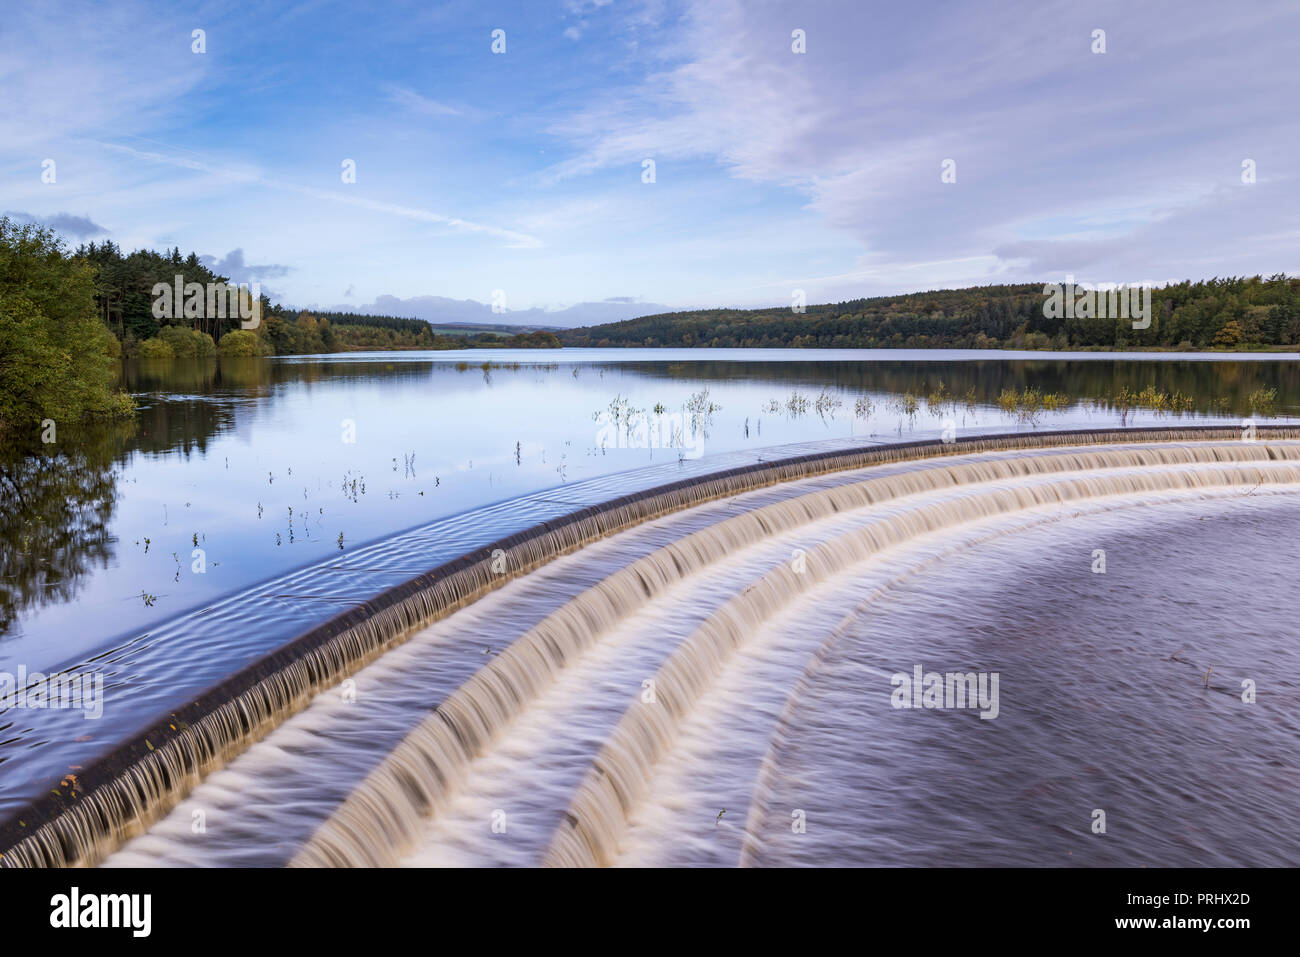 Water flowing over spillway from calm scenic tree-lined lake, under deep blue sky - Fewston Reservoir, Washburn Valley, North Yorkshire, England, UK. Stock Photo